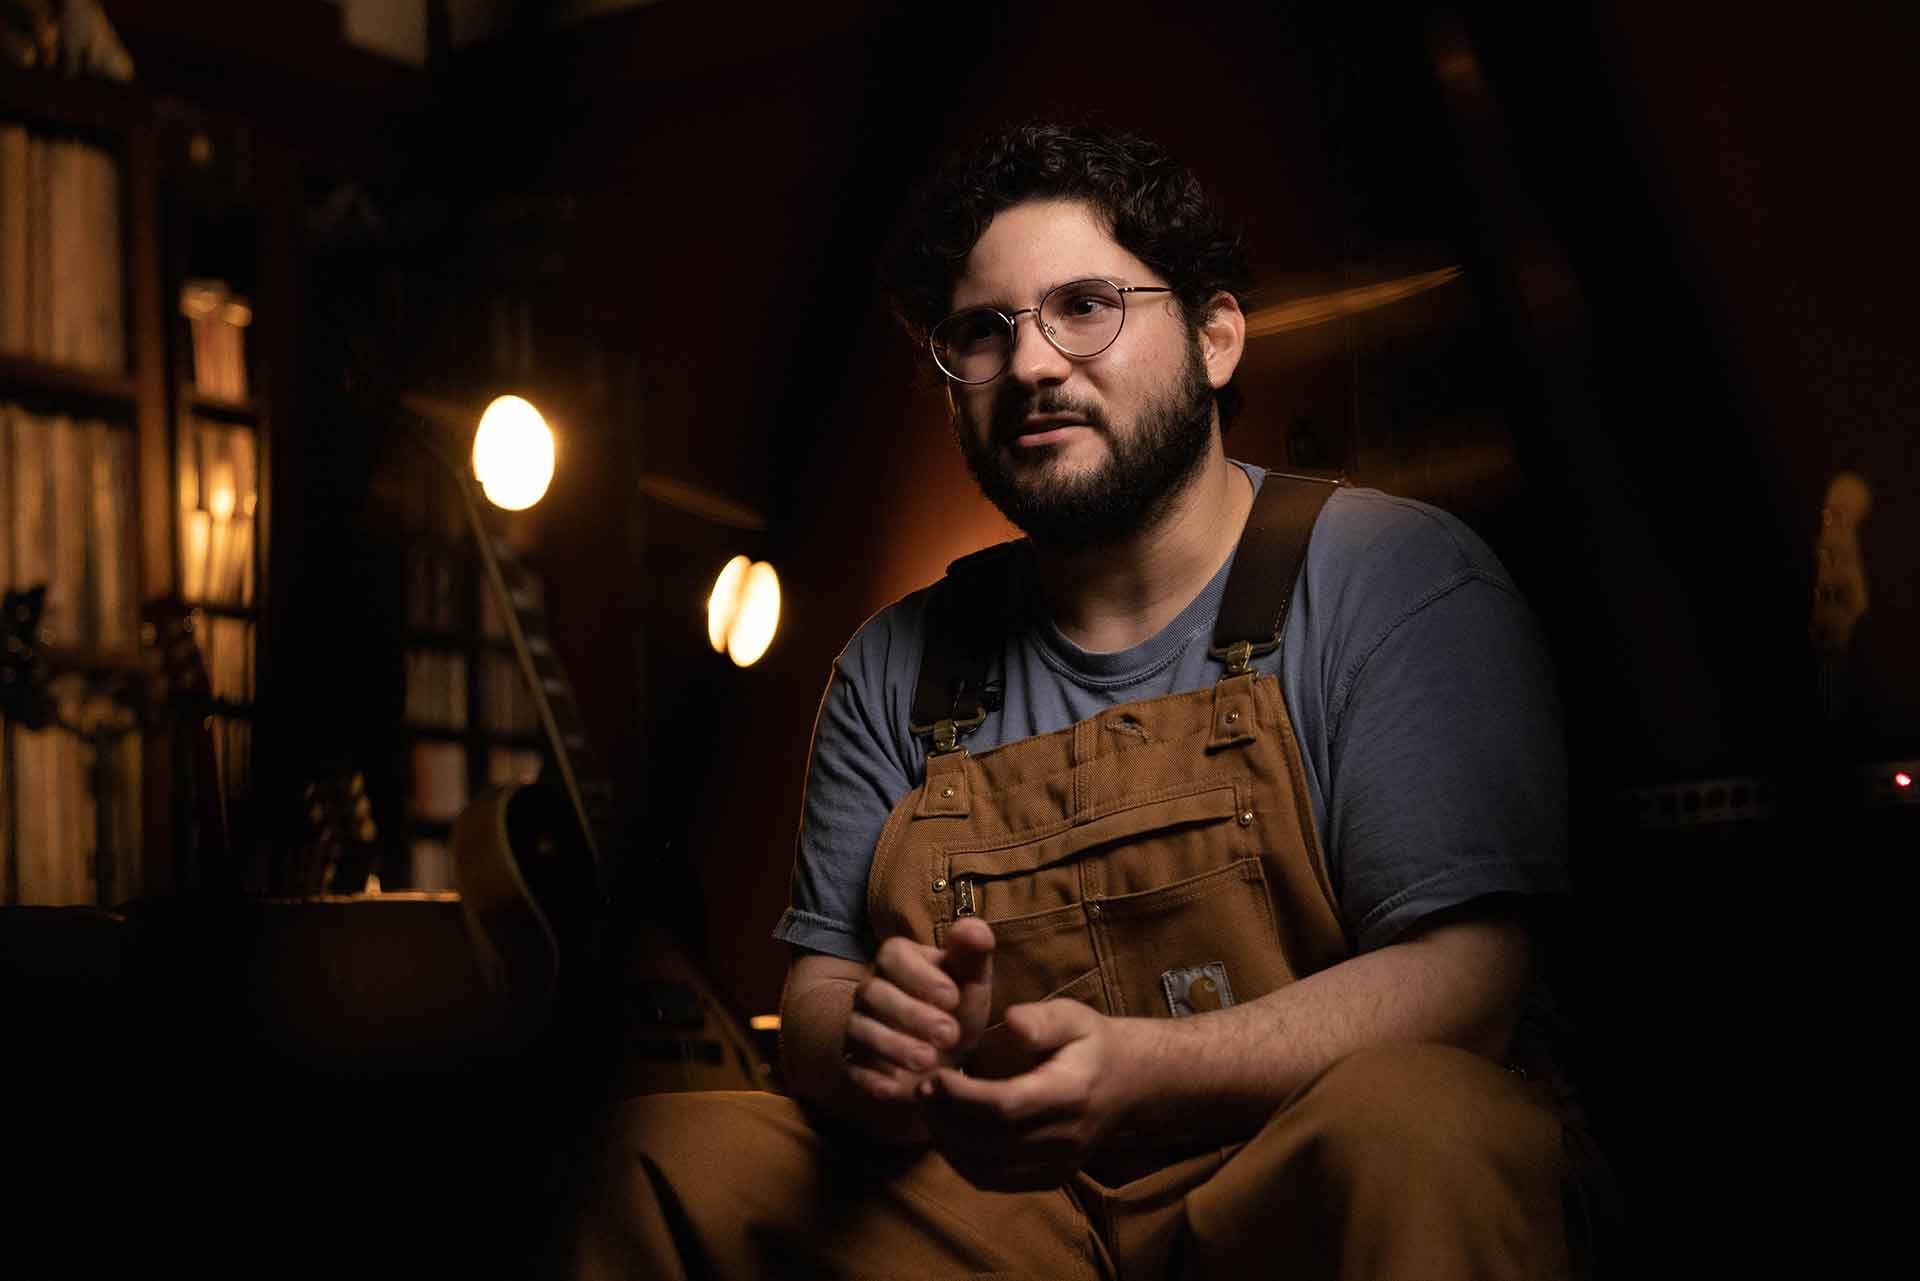 Sam is wearing brown overalls and is sitting. Two lights shine down on him in the background.